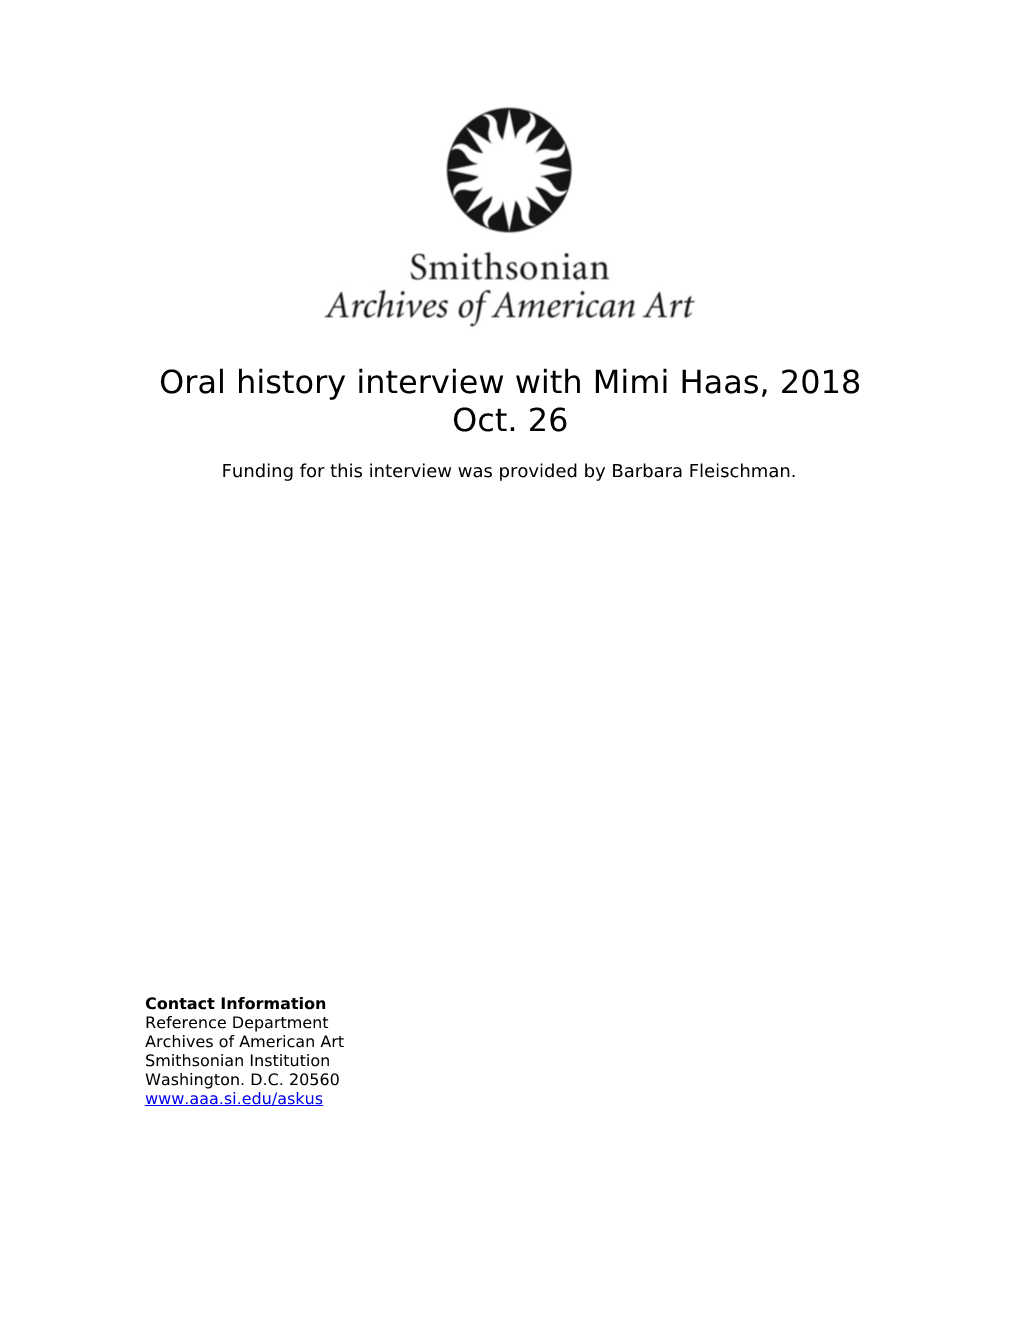 Oral History Interview with Mimi Haas, 2018 Oct. 26